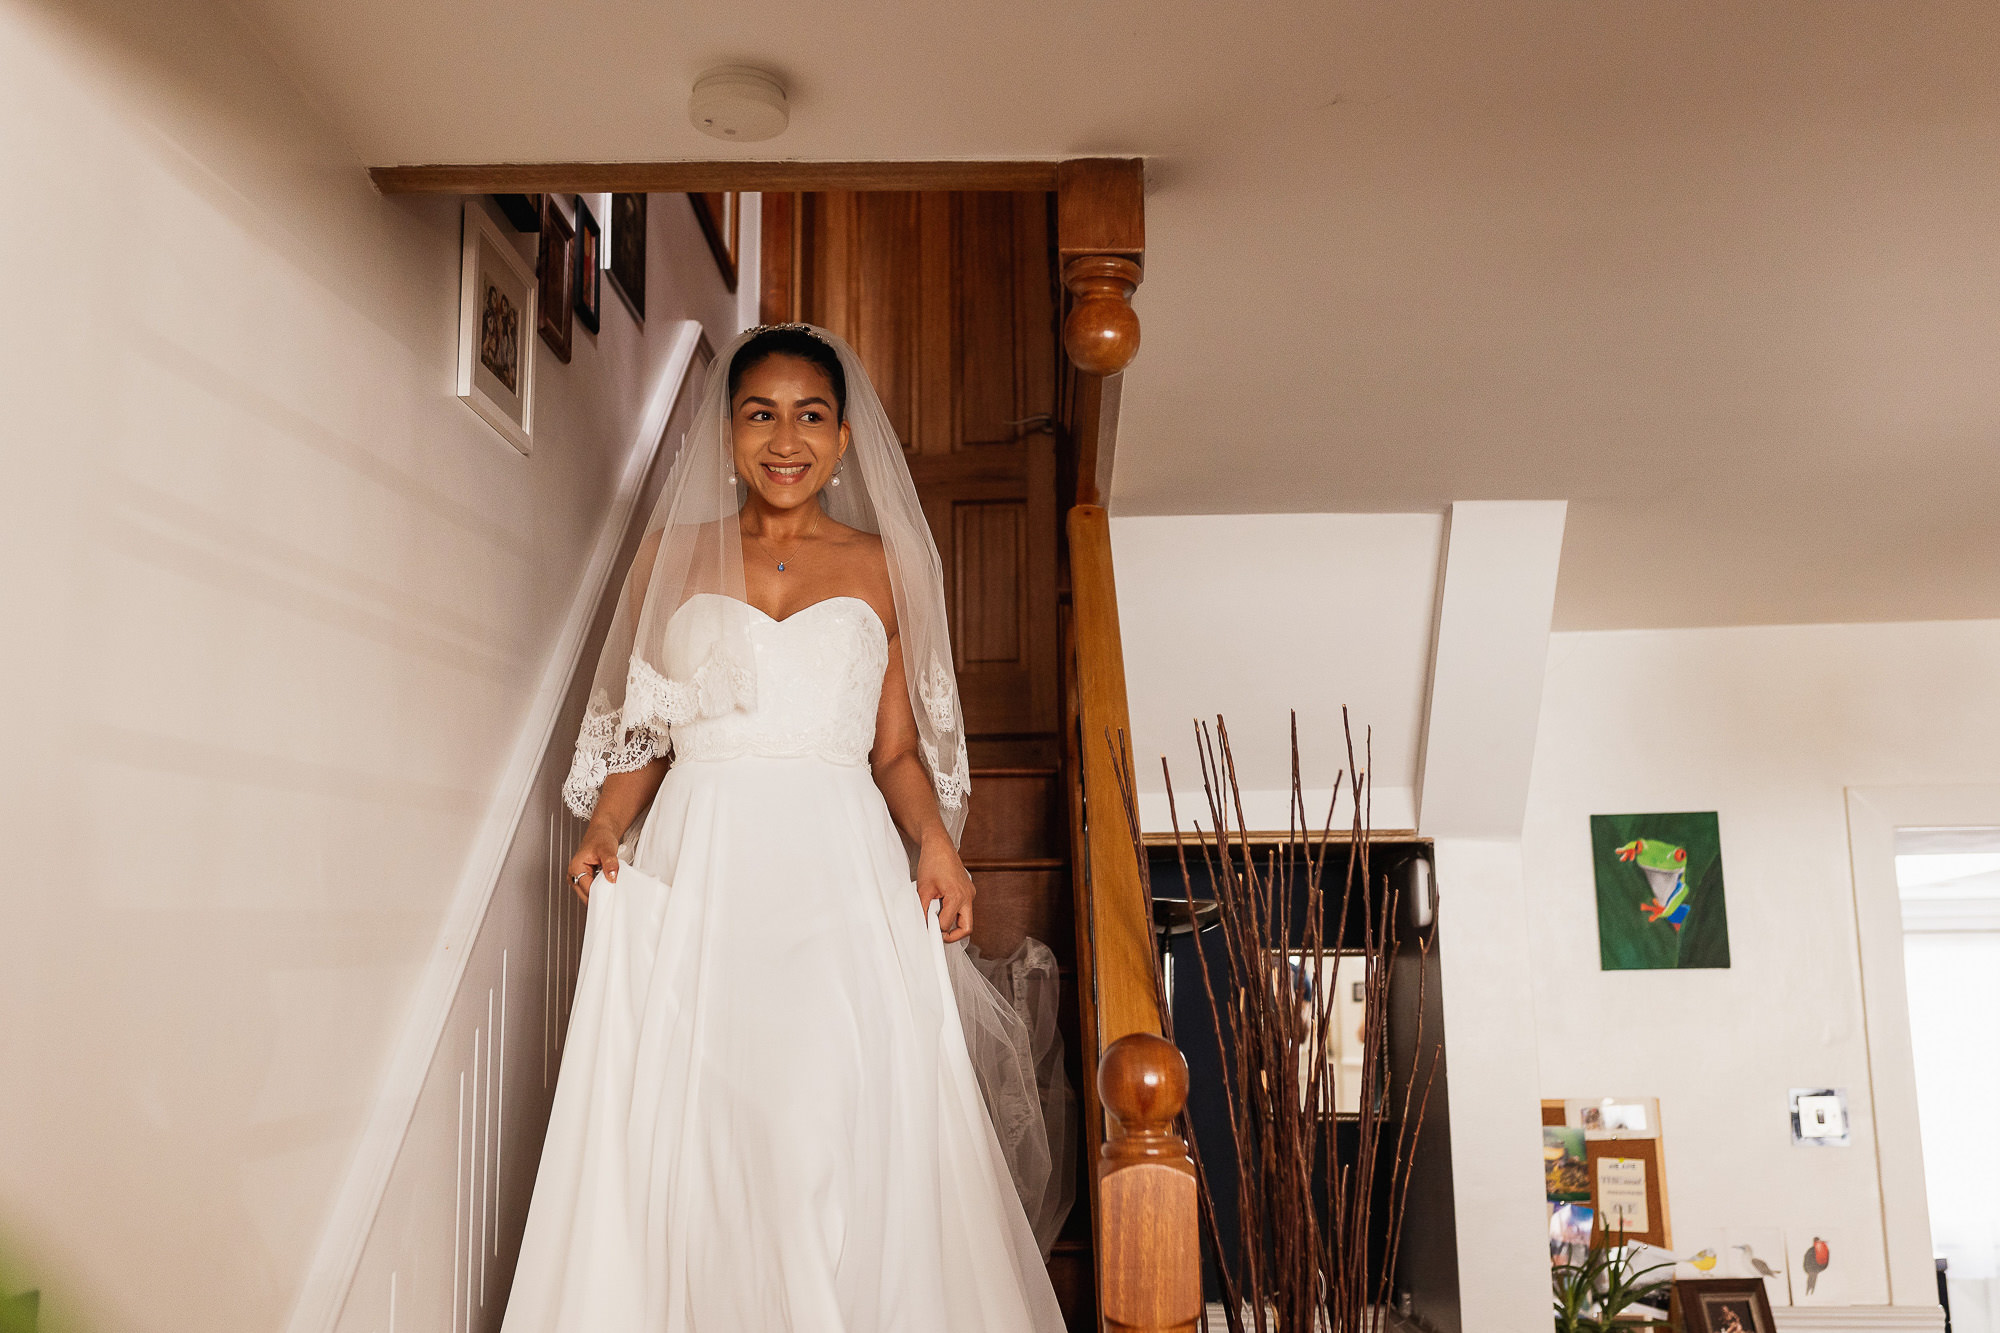 Multicultural wedding photographer, London, first look